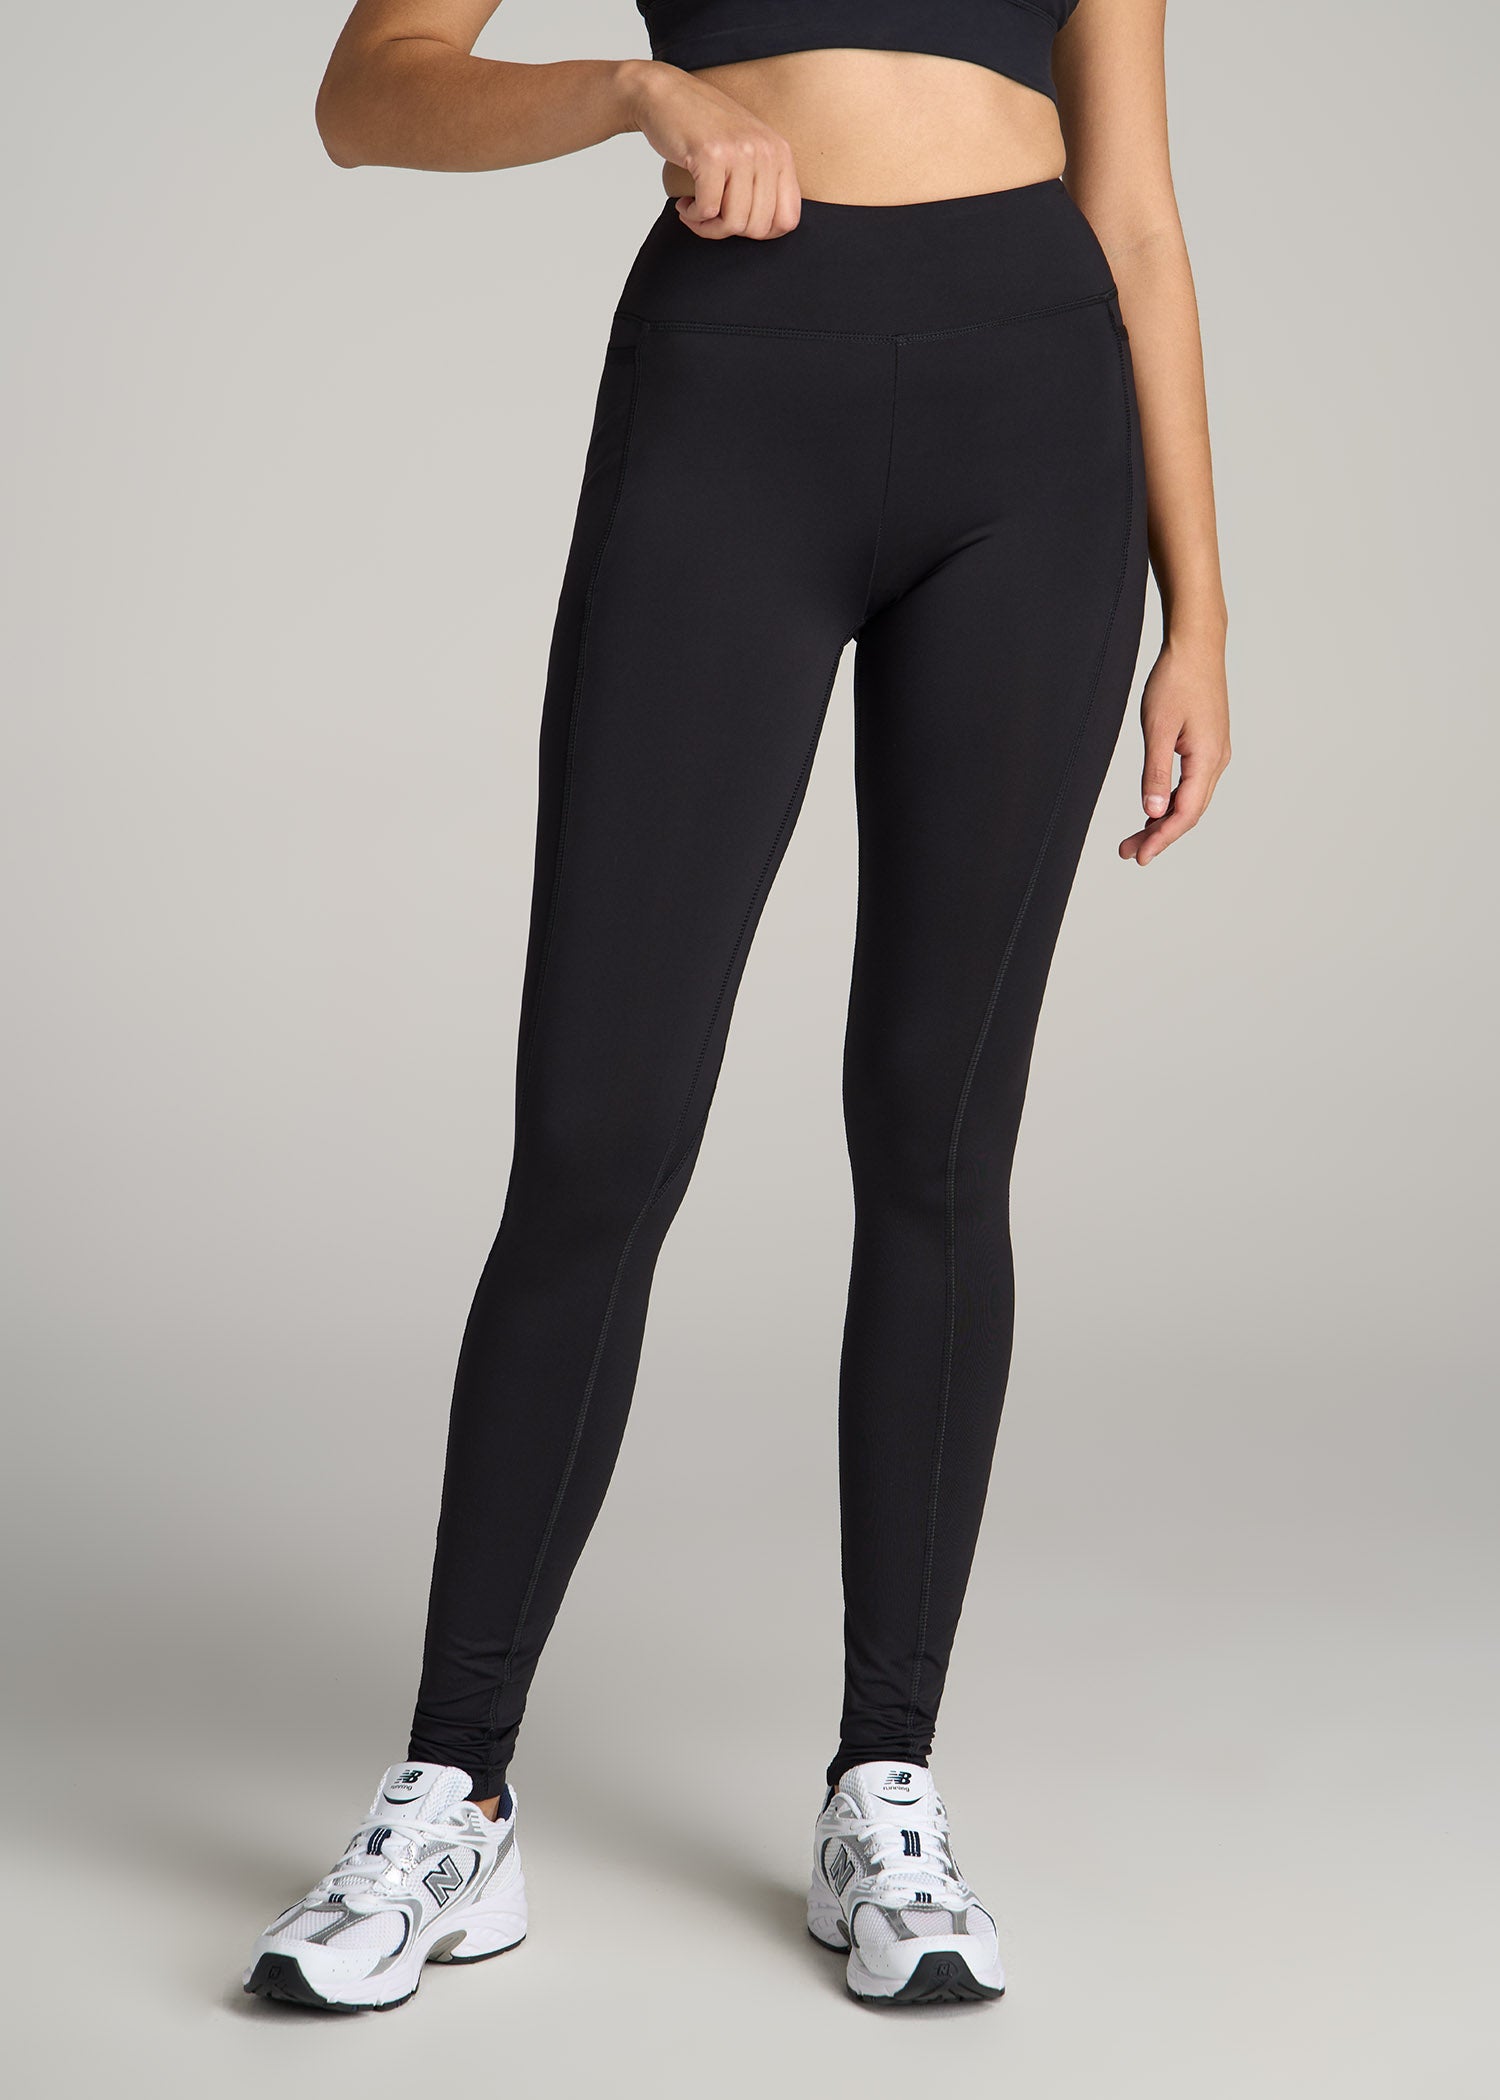 Waist gripping leggings now available up to size 2XL!! More colors